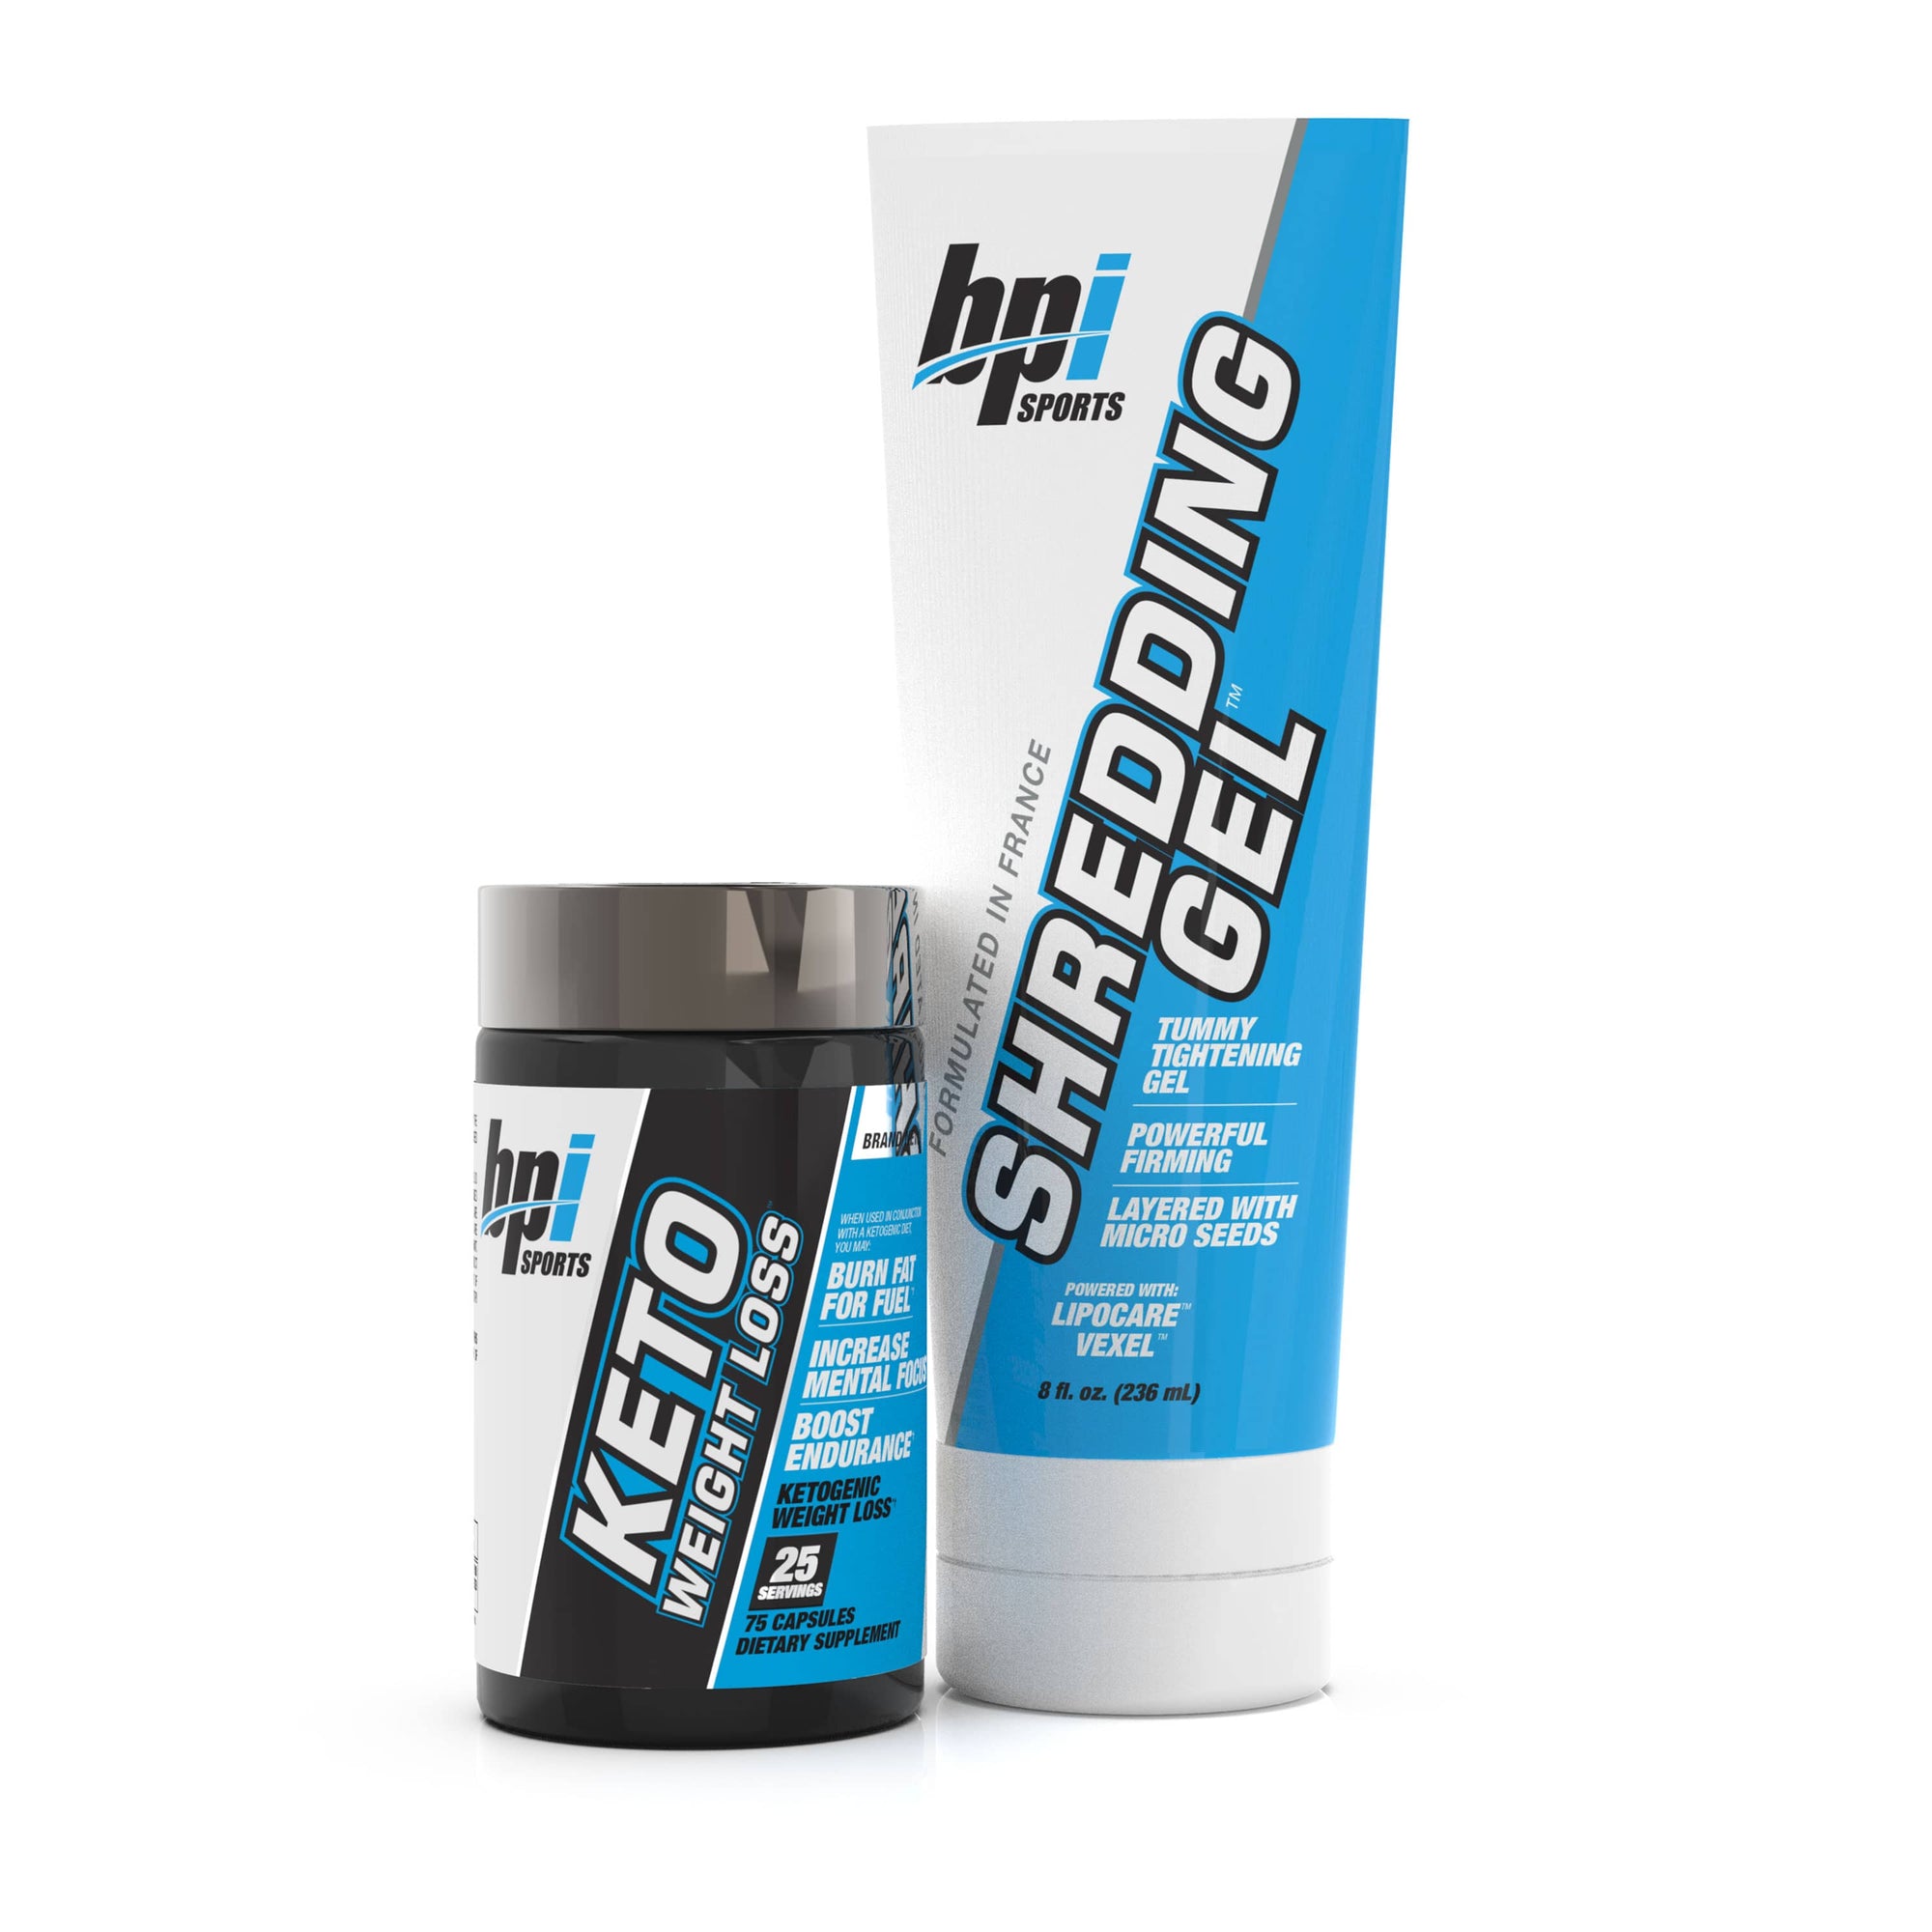 BPI Sports Keto Weight Loss Capsule bottle  and Shredding Gel Weight Loss tube Combo